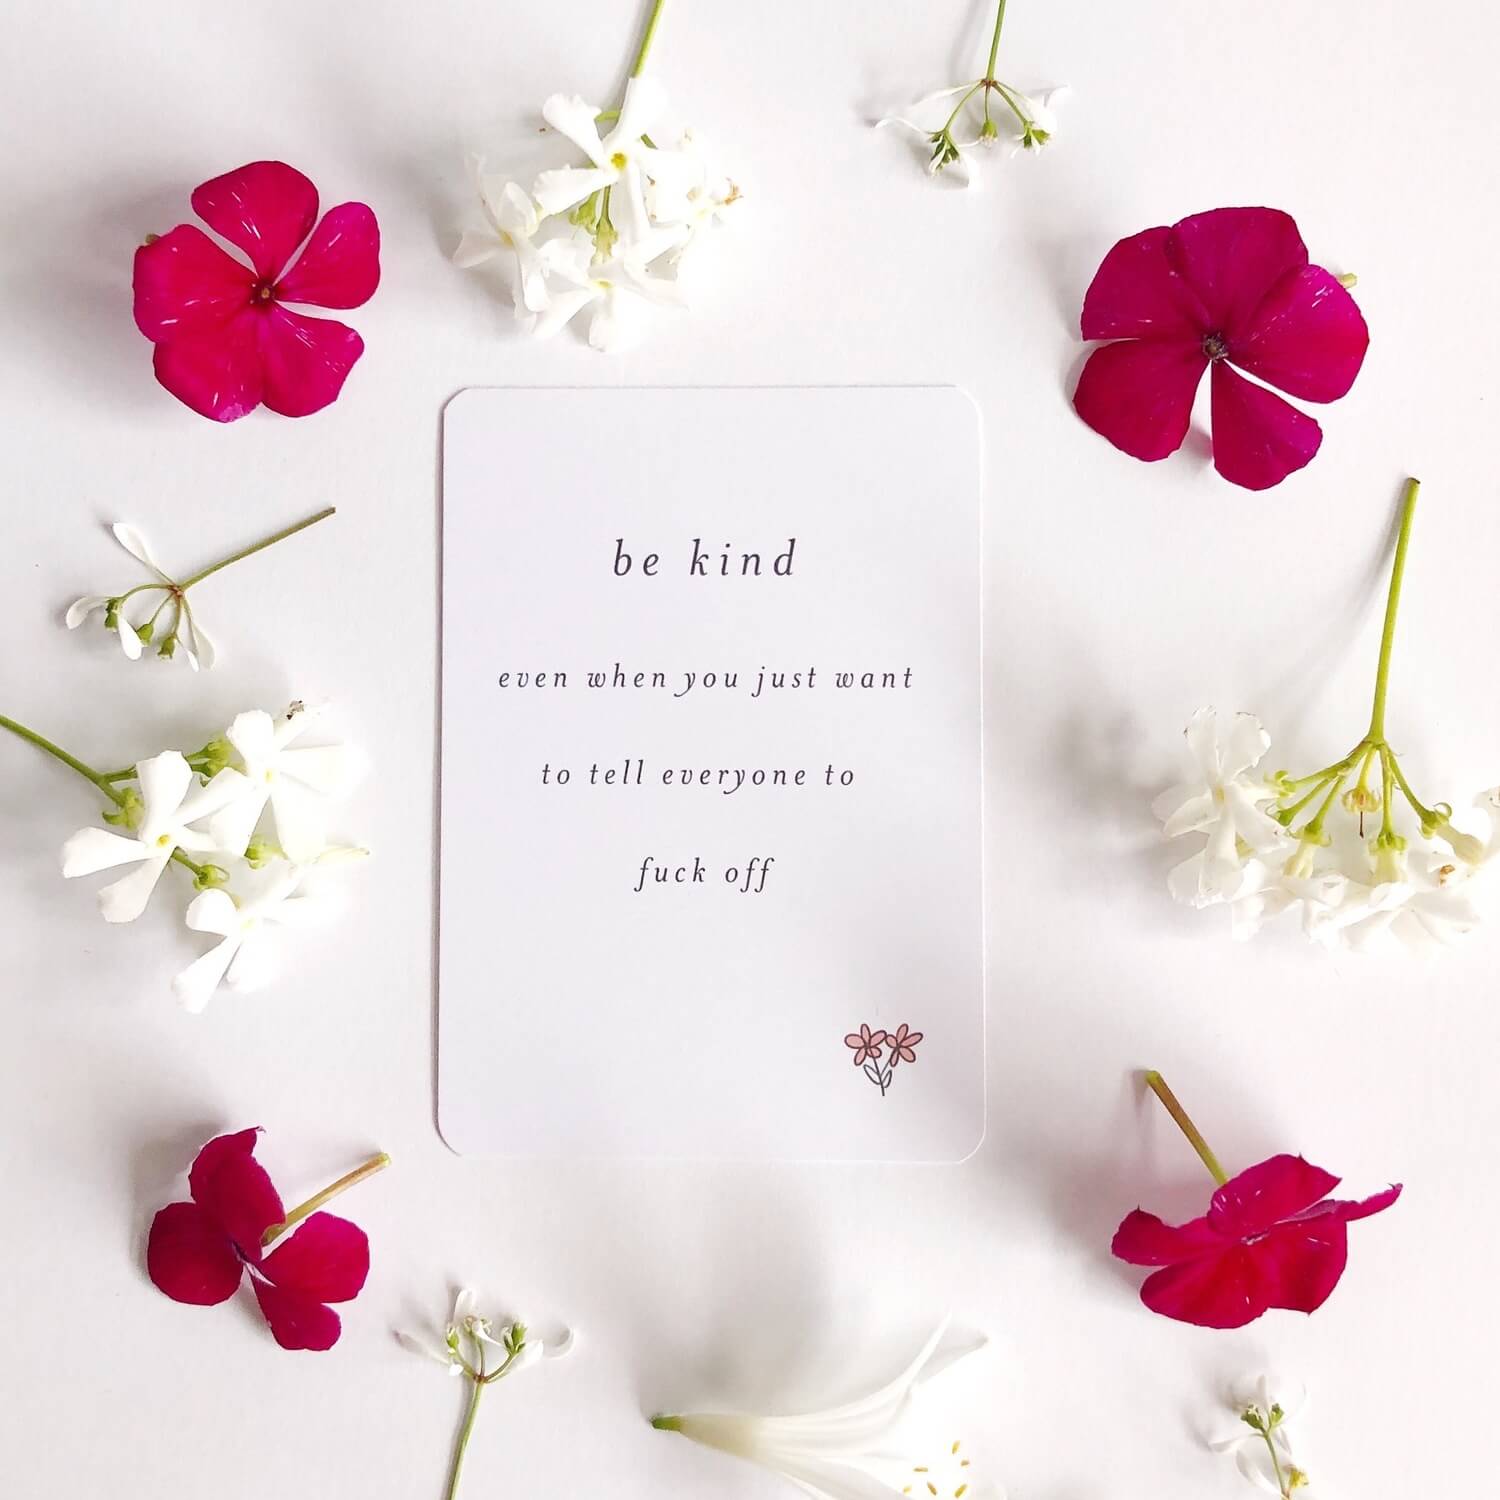 Memory Makers Sweary Self-Love Edition be kind even when you just want to tell everyone to fuck off card